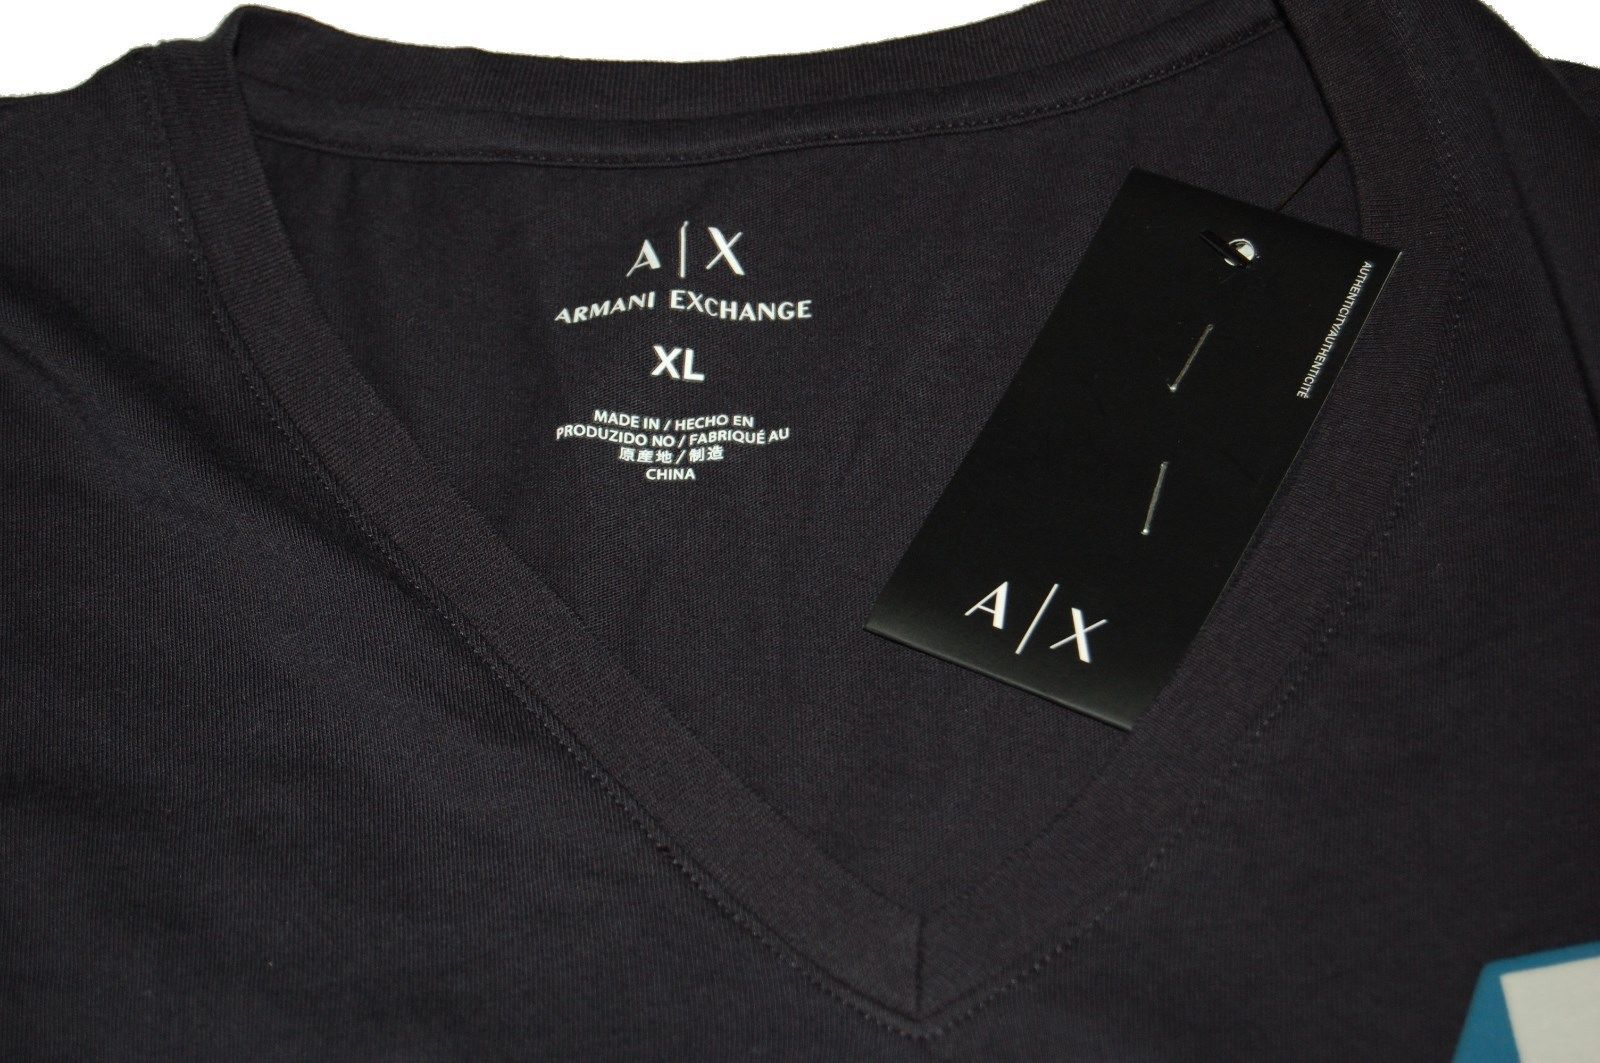 armani exchange made in china - 65% OFF 